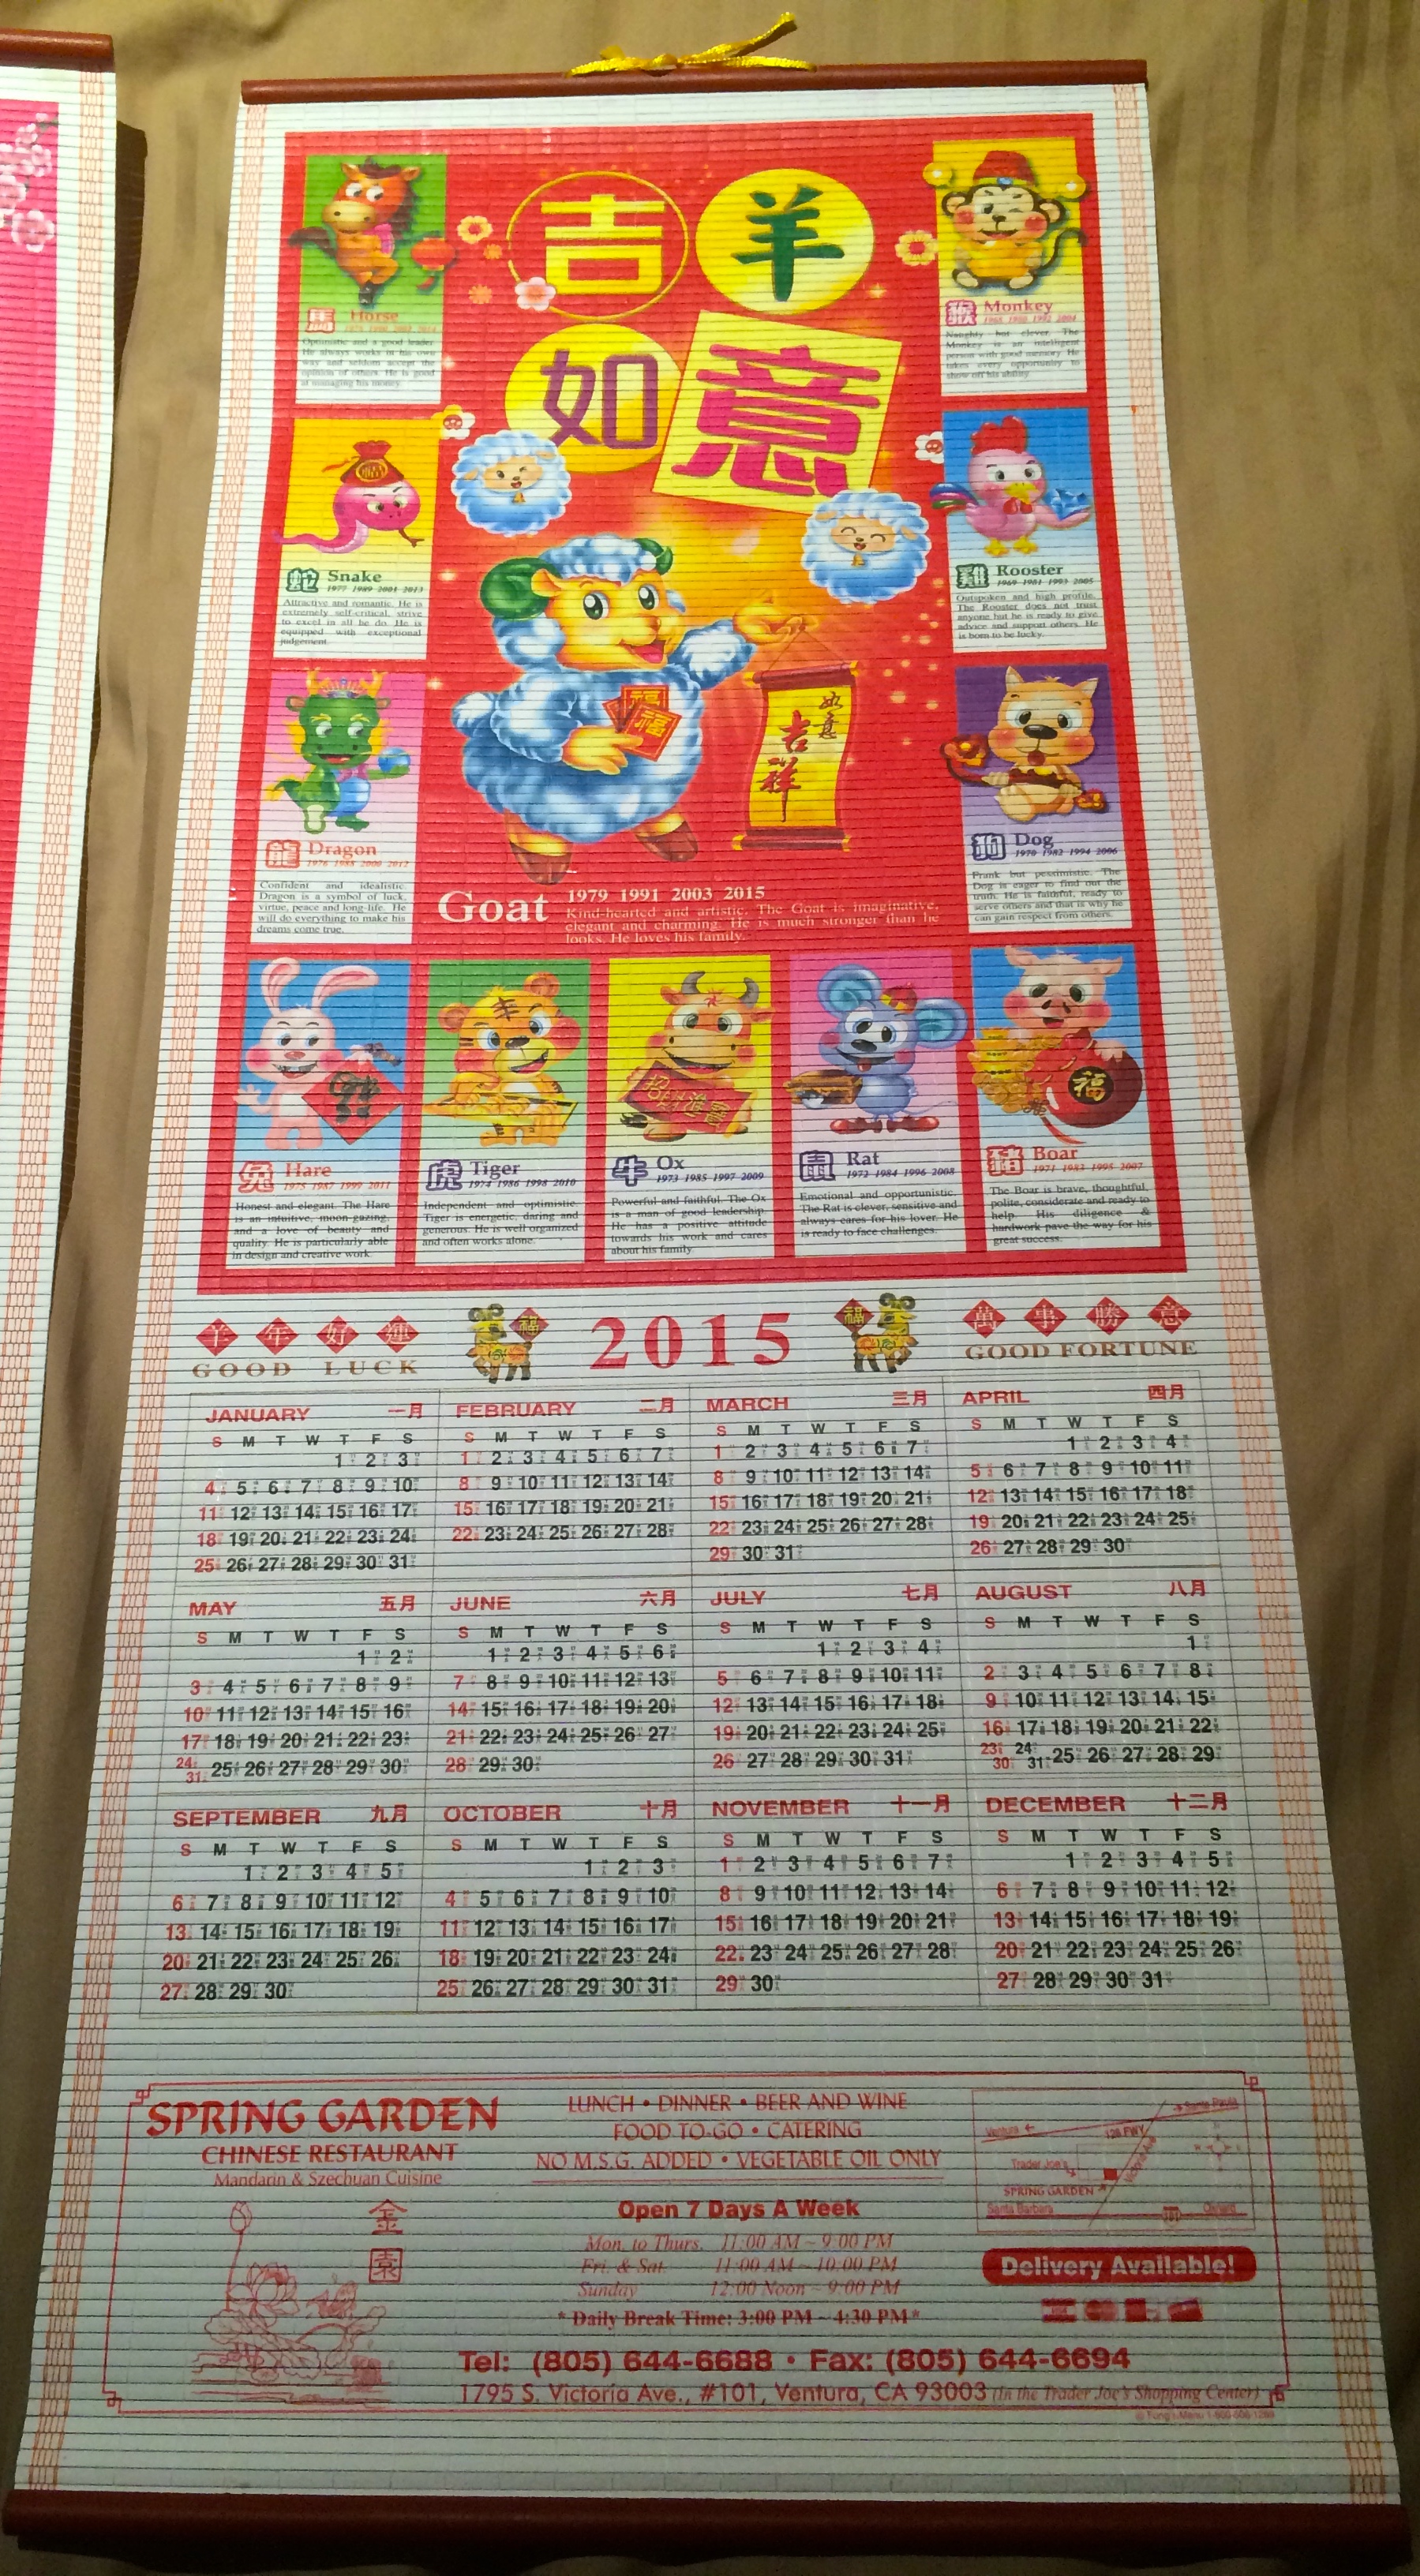 Chinese Calendar – Cultural Object | Jake Rice - Visual Journal of Asian Culture1799 x 3264